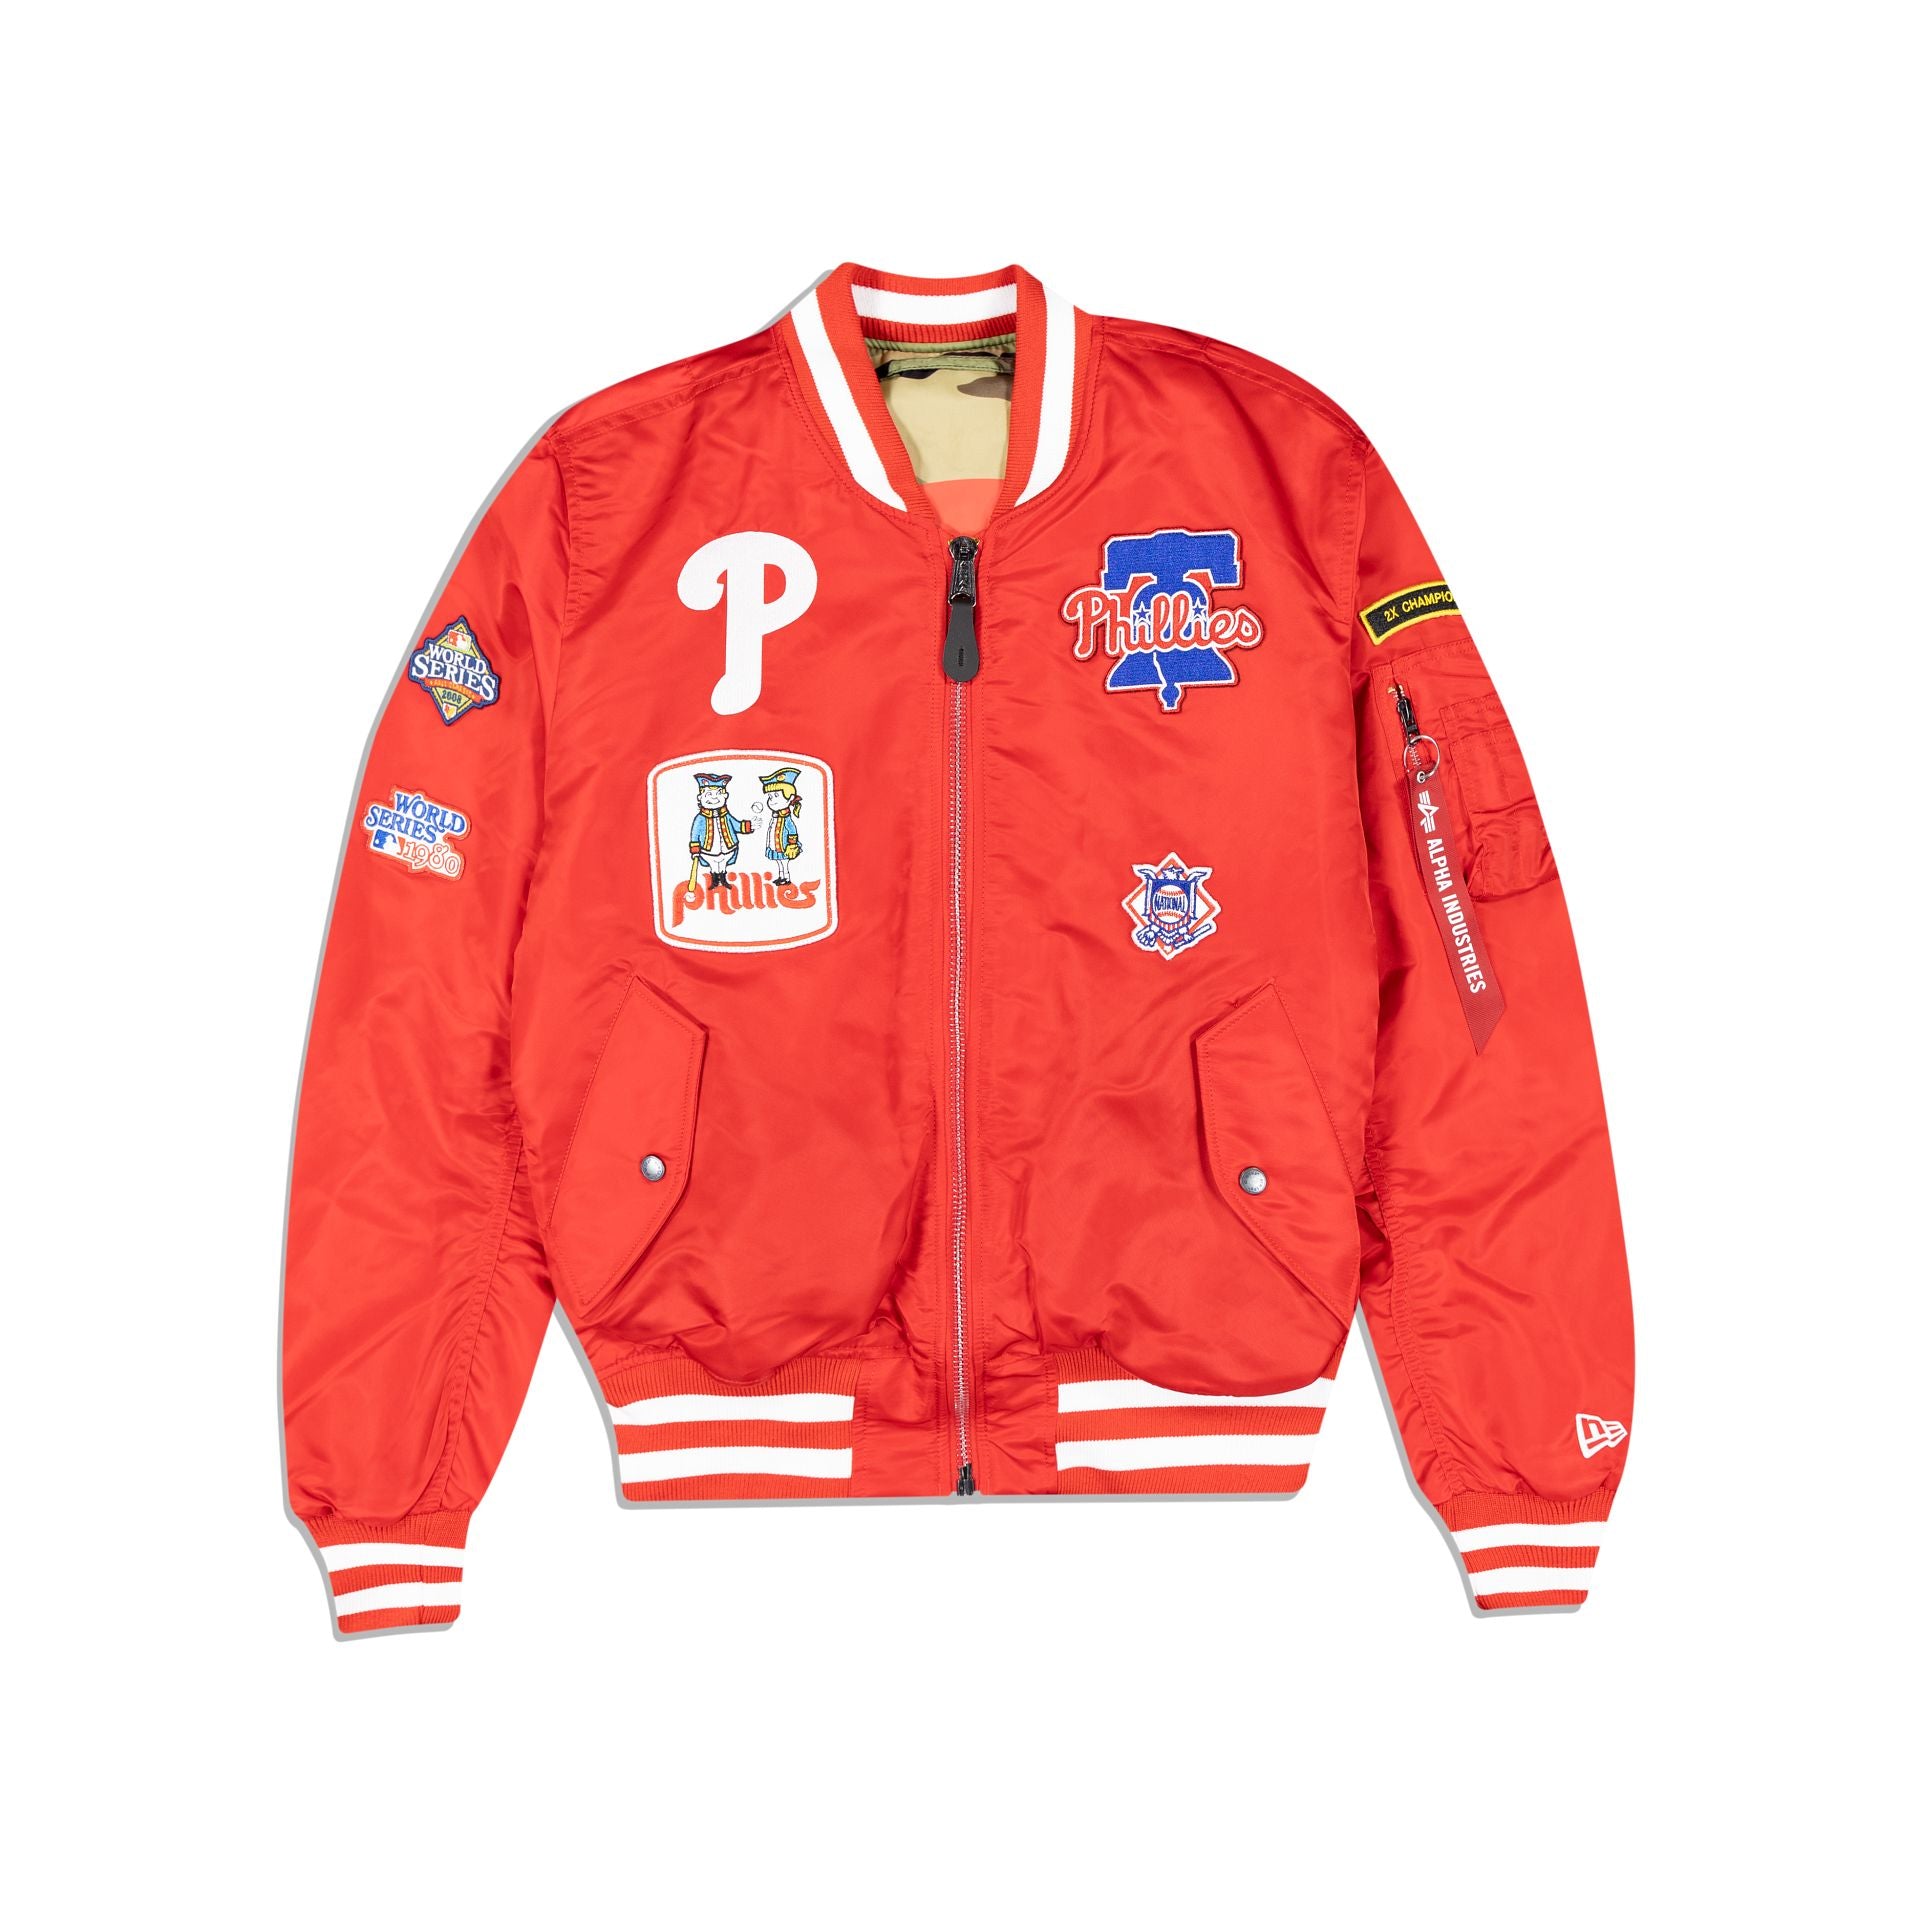 Alpha Industries Red Bomber Jacket Factory Sale | www ...